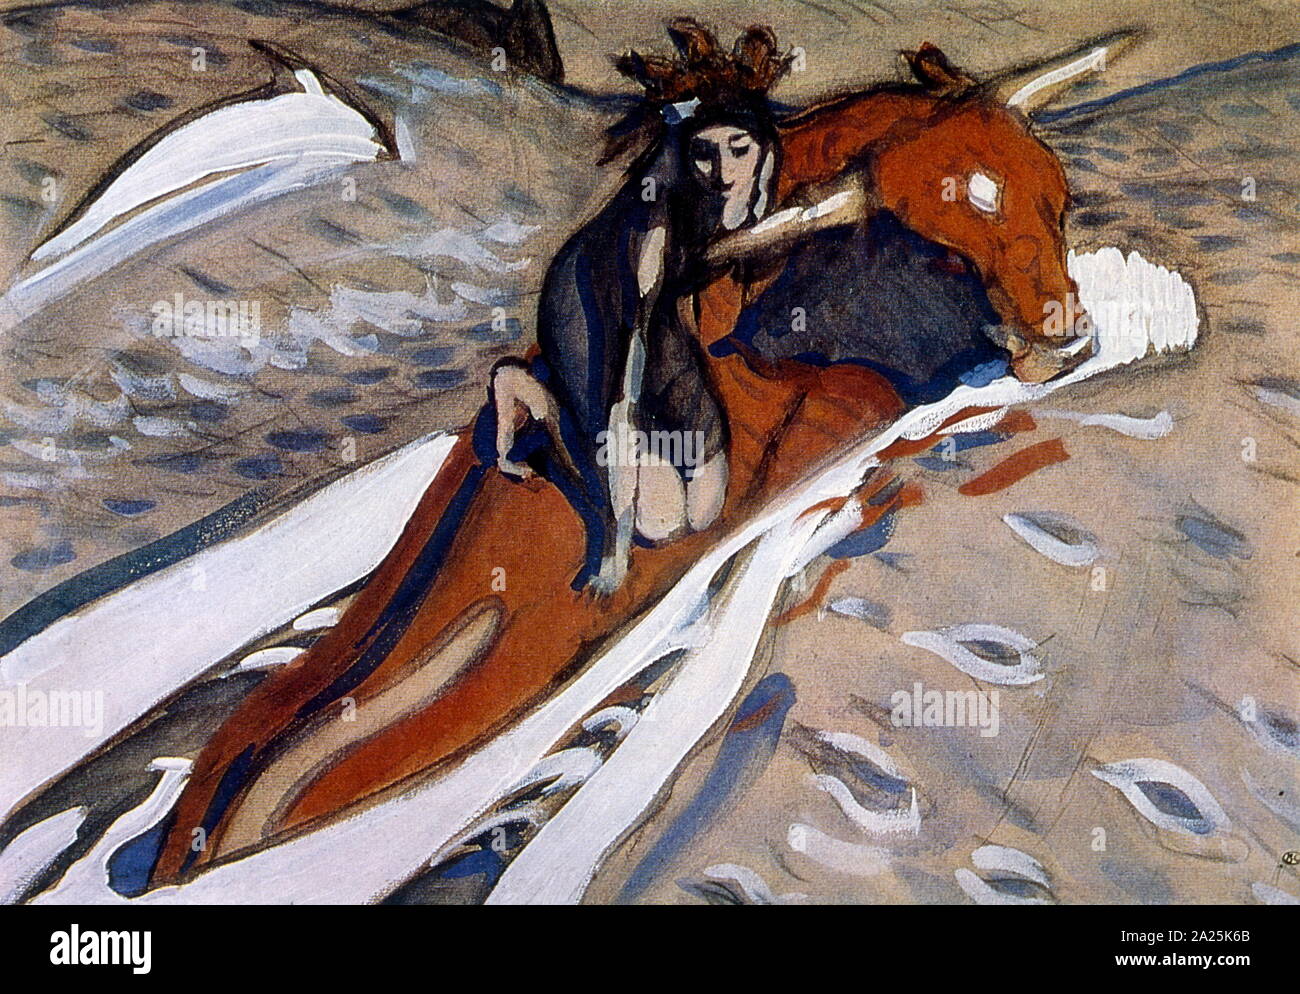 Abduction of Europa 1910 by Valentin Serov, (1865-1911) Russian painter, and one of the premier portrait artists of his era. In Greek mythology, Europa was the mother of King Minos of Crete, after whom the continent Europe was named. The story of her abduction by Zeus in the form of a white bull was a Cretan story Stock Photo